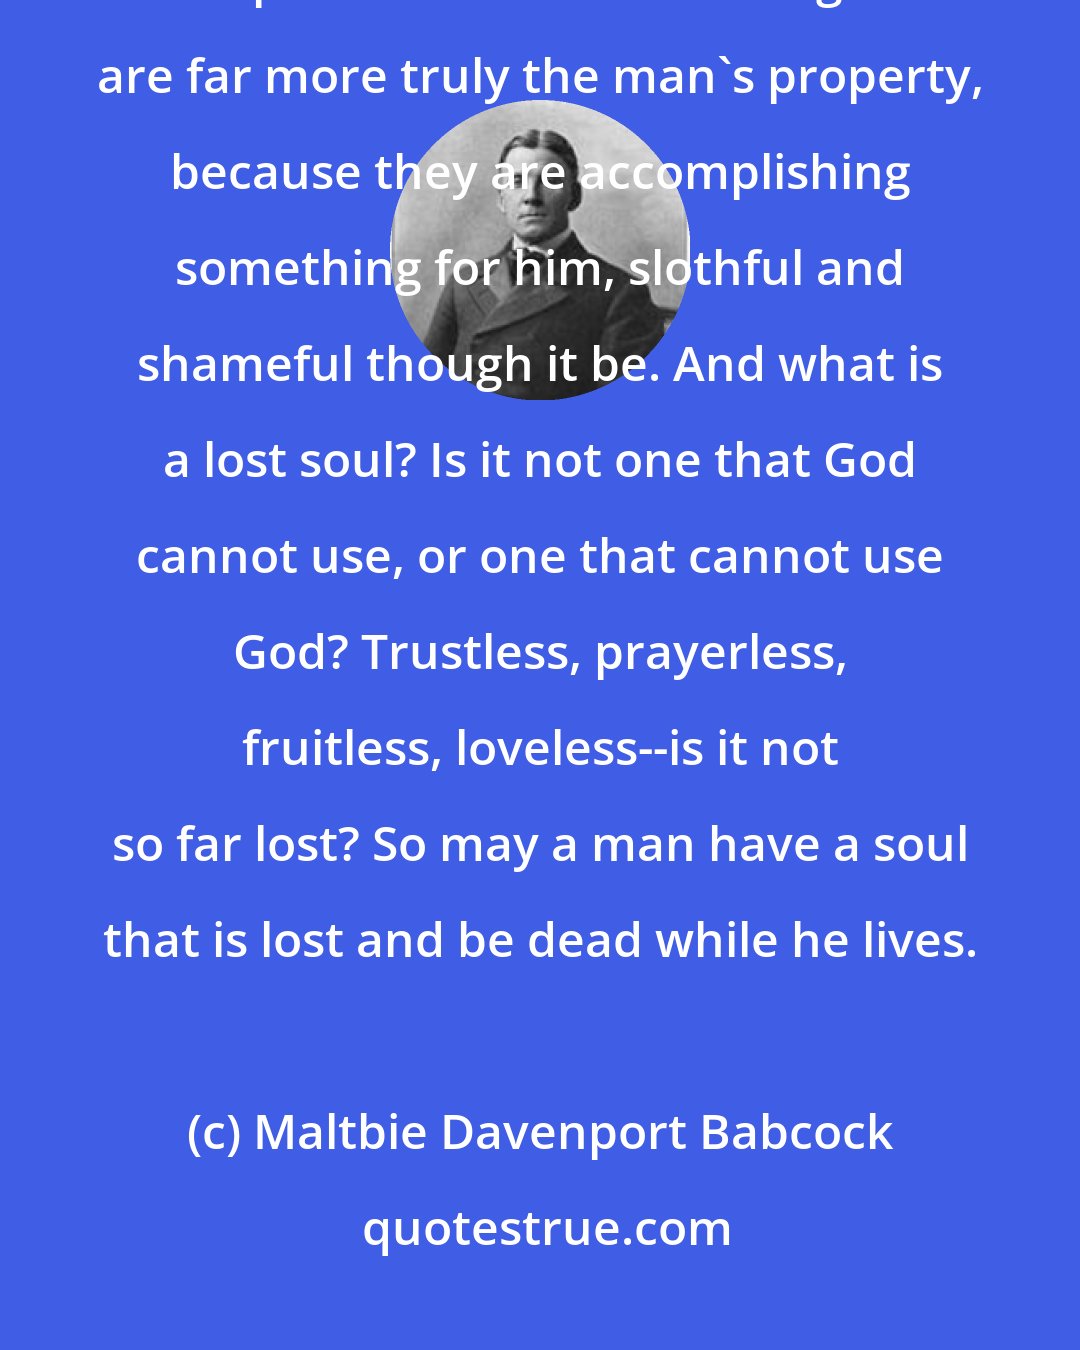 Maltbie Davenport Babcock: The only test of possession is use. The talent that is buried is not owned. The napkin and the hole in the ground are far more truly the man's property, because they are accomplishing something for him, slothful and shameful though it be. And what is a lost soul? Is it not one that God cannot use, or one that cannot use God? Trustless, prayerless, fruitless, loveless--is it not so far lost? So may a man have a soul that is lost and be dead while he lives.